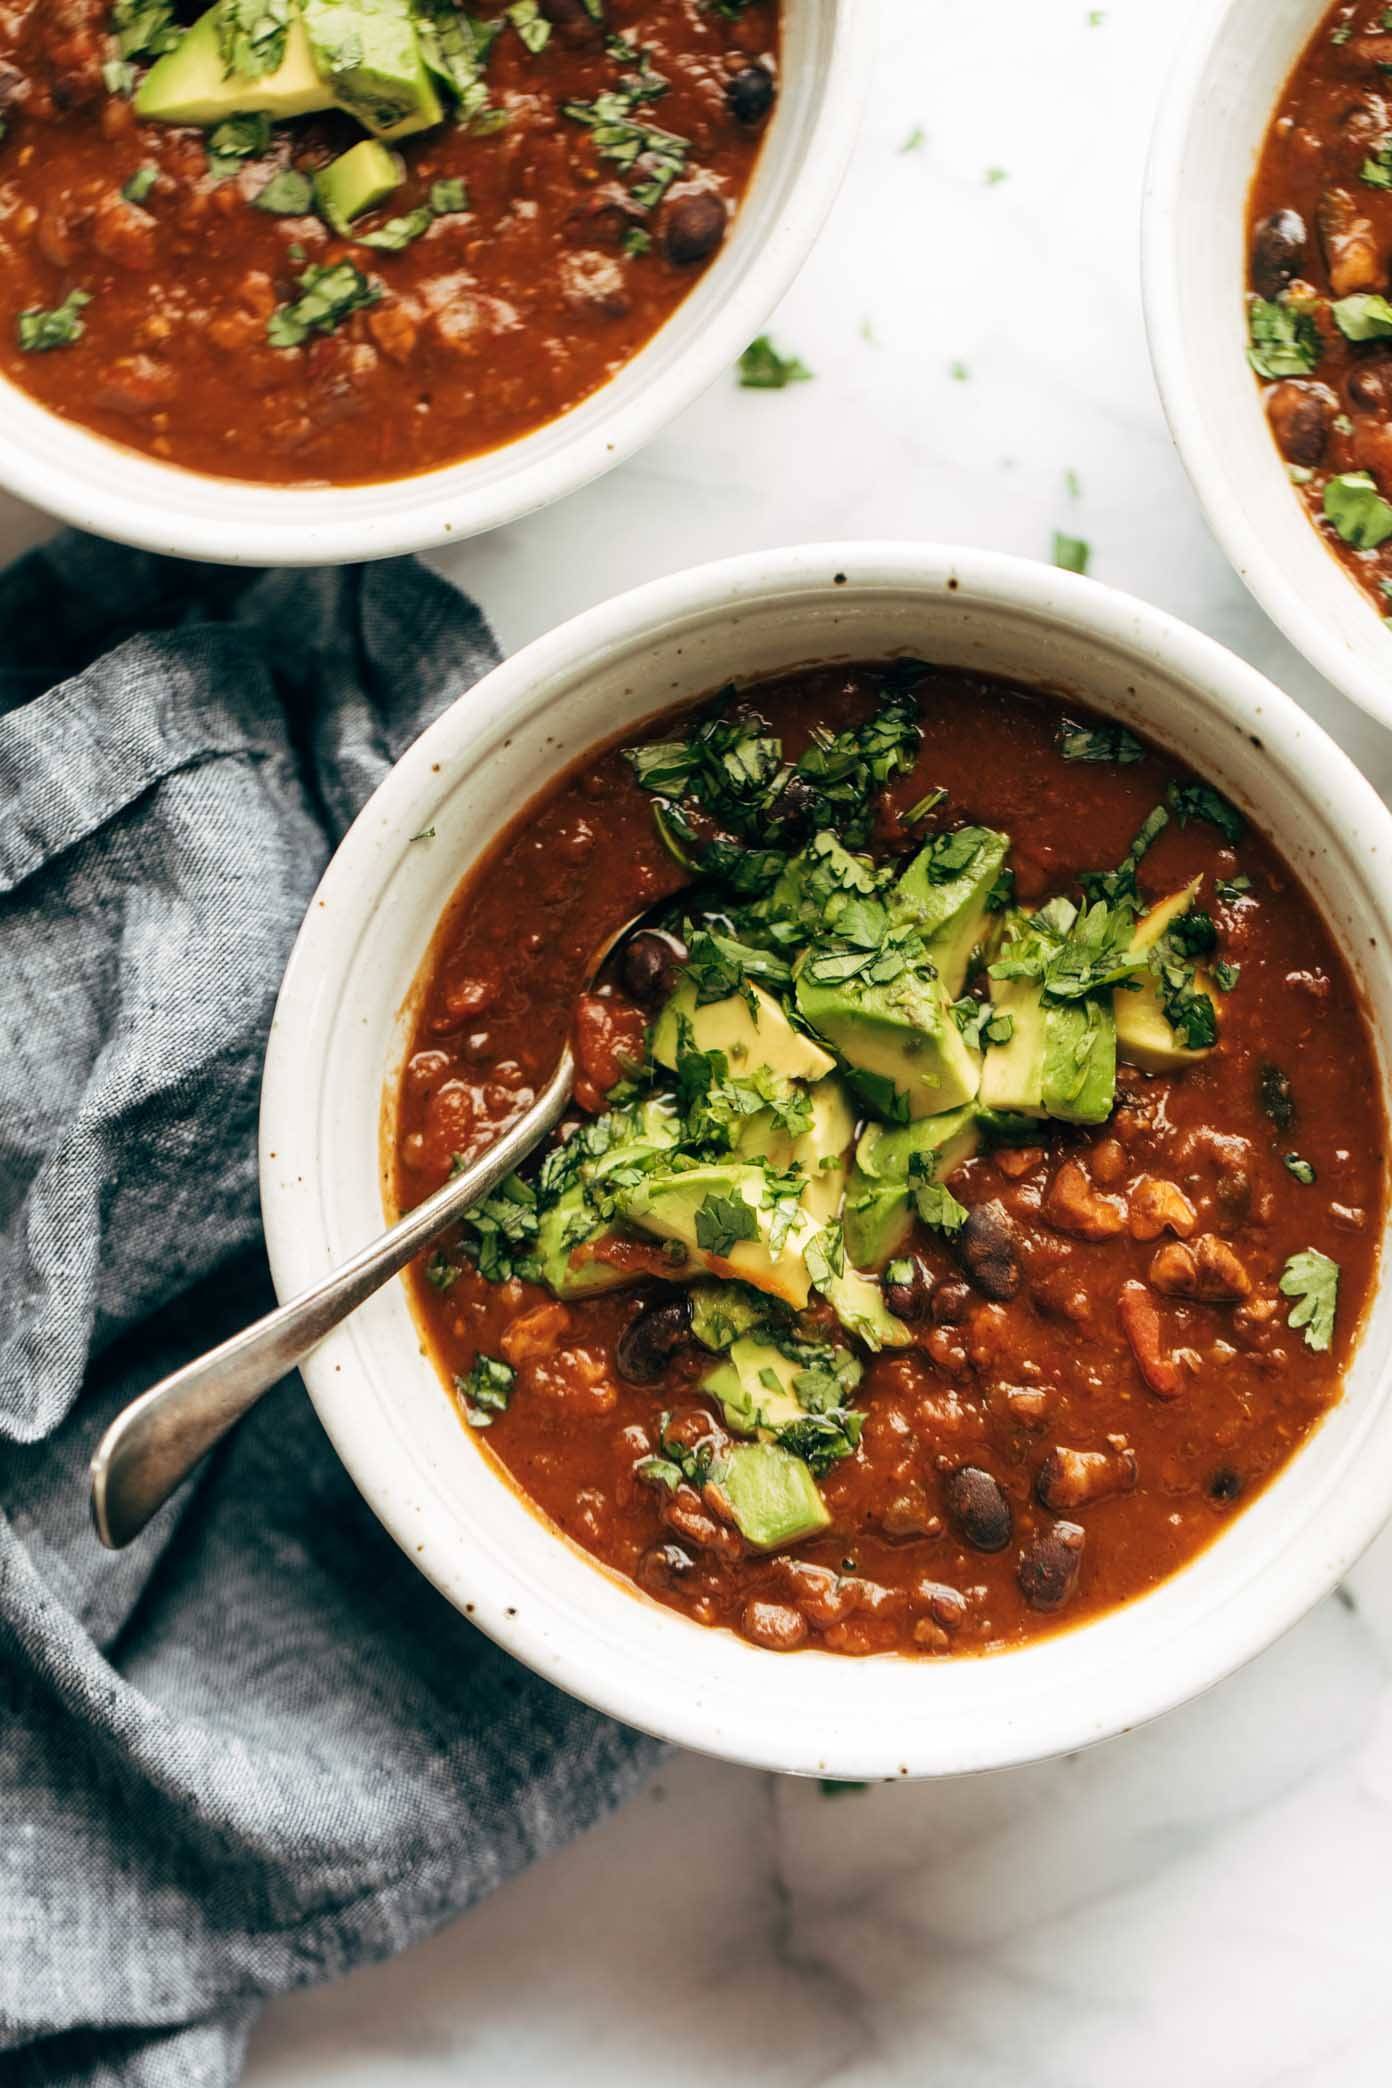 Chili in a bowl with a spoon and toppings.